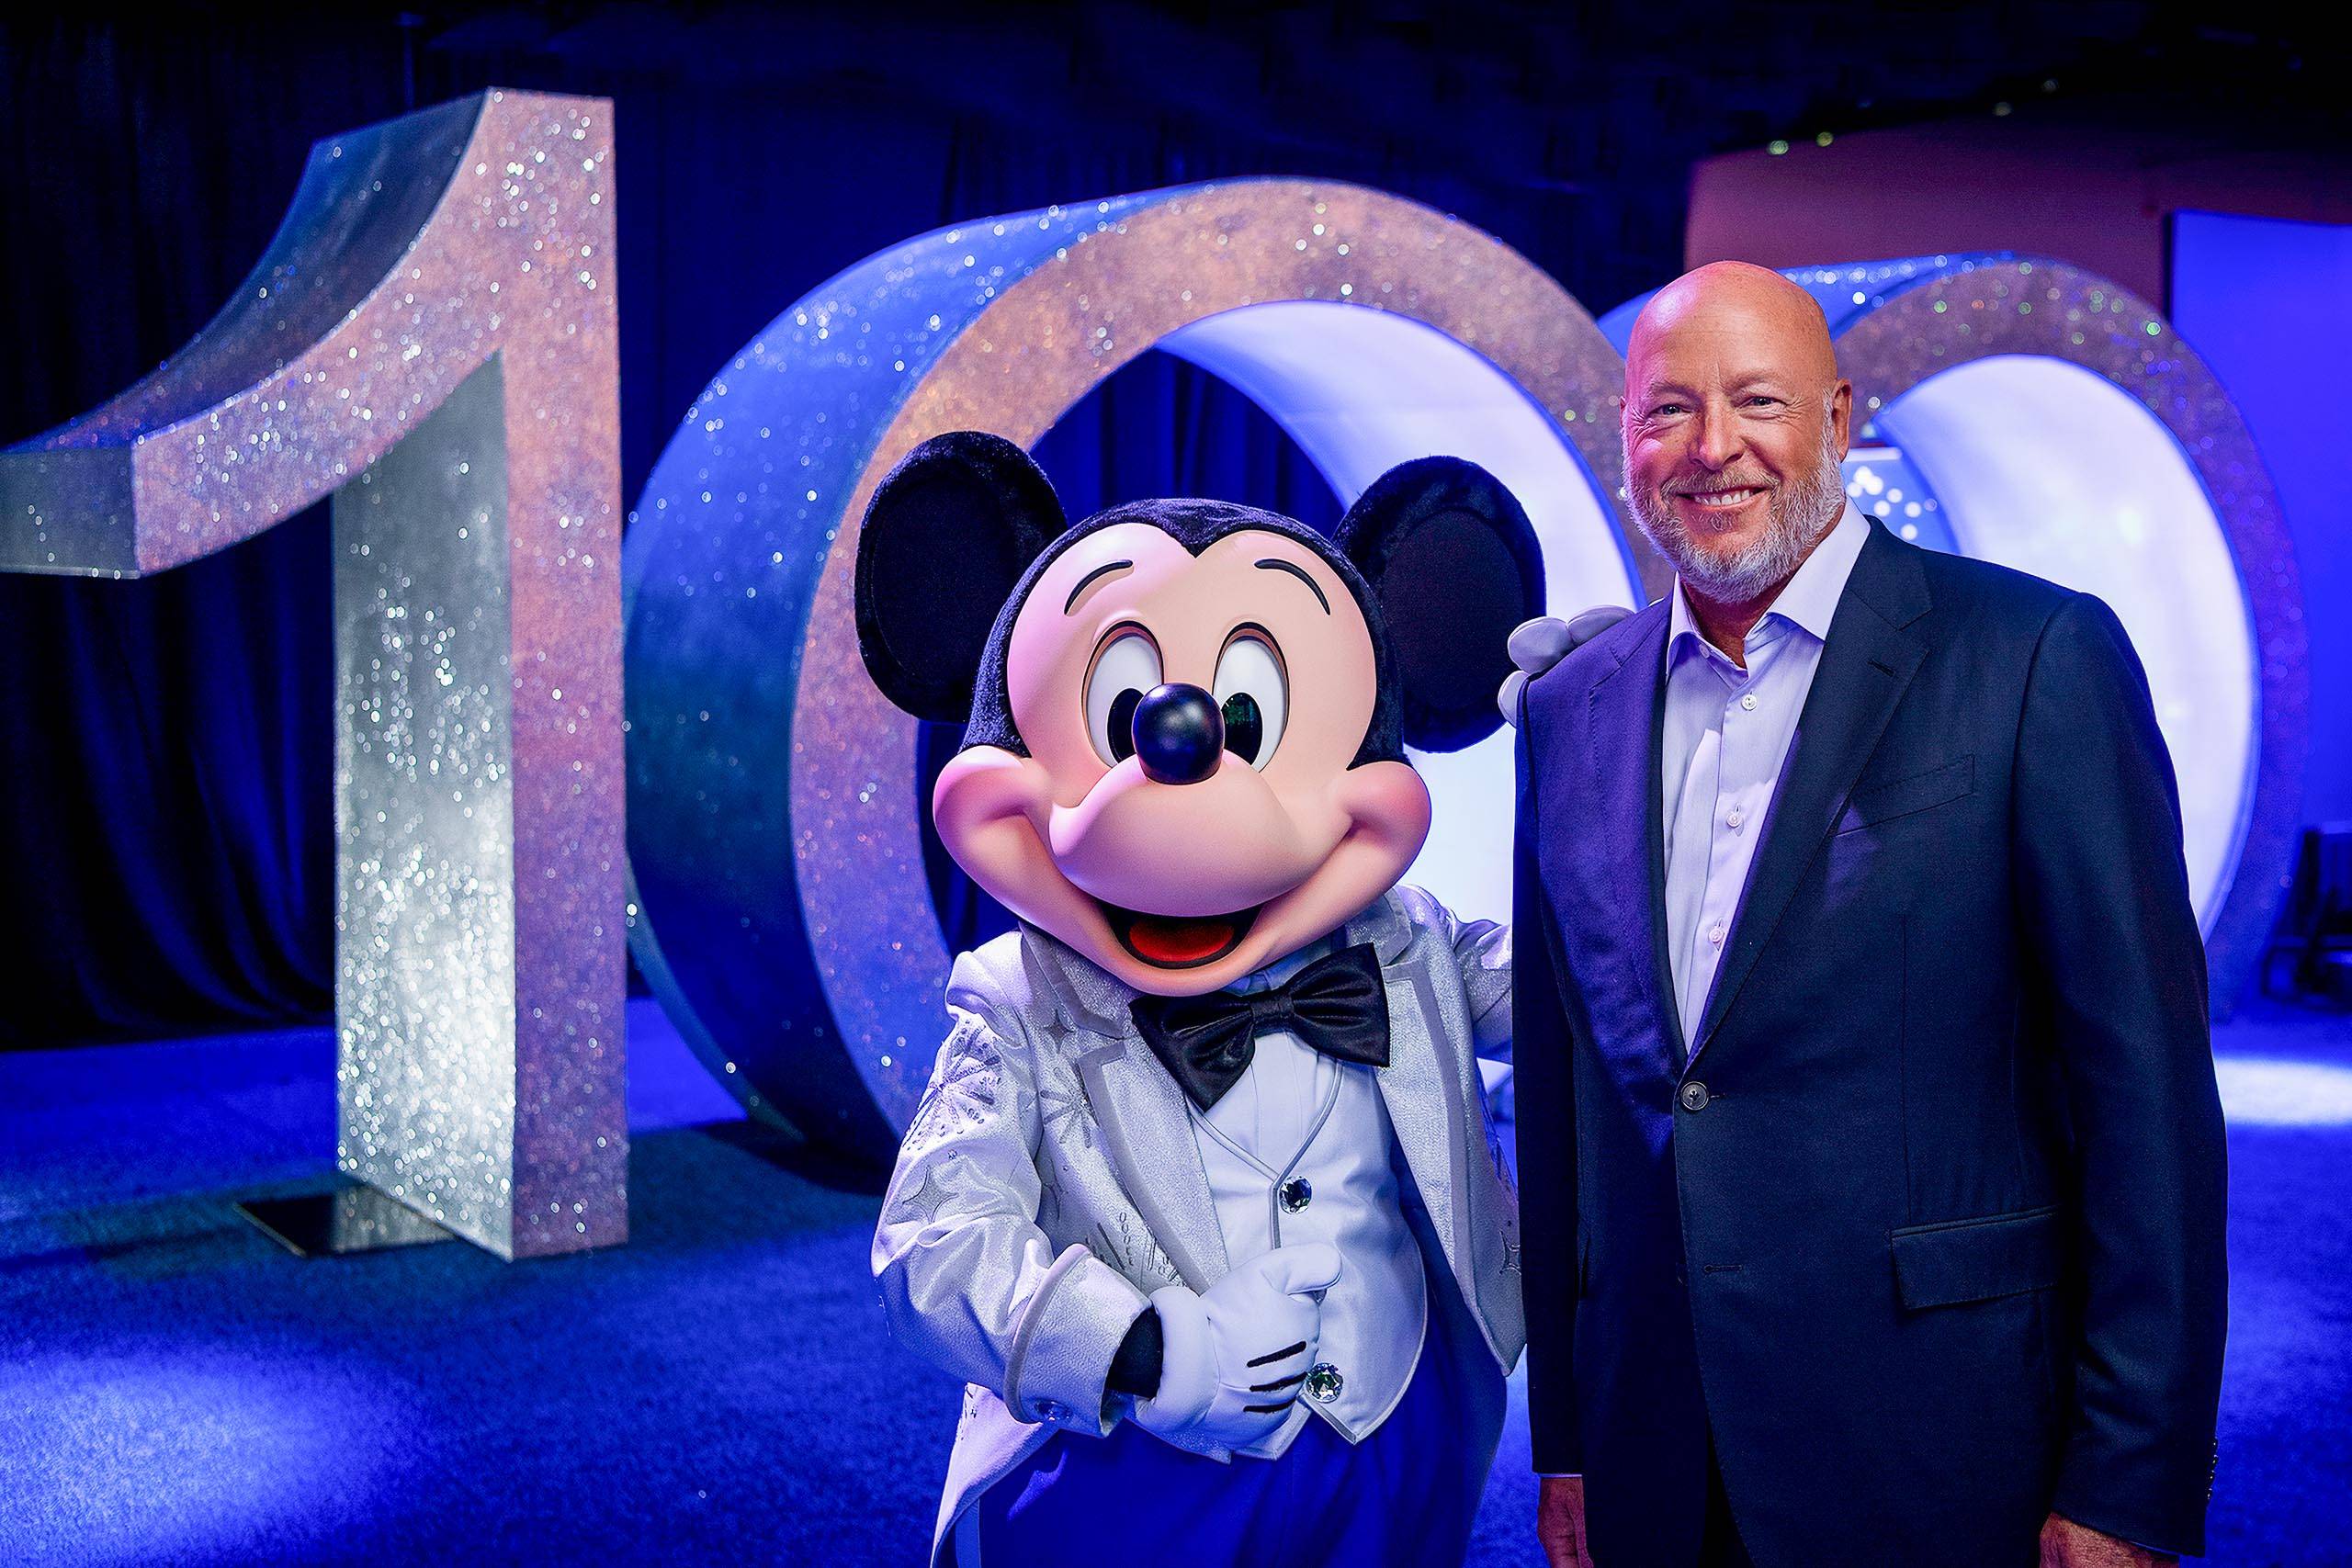 Disney CEO Bob Chapek says that Disney+ will. become a consumer engagement platform deeply integrated with the theme park experience